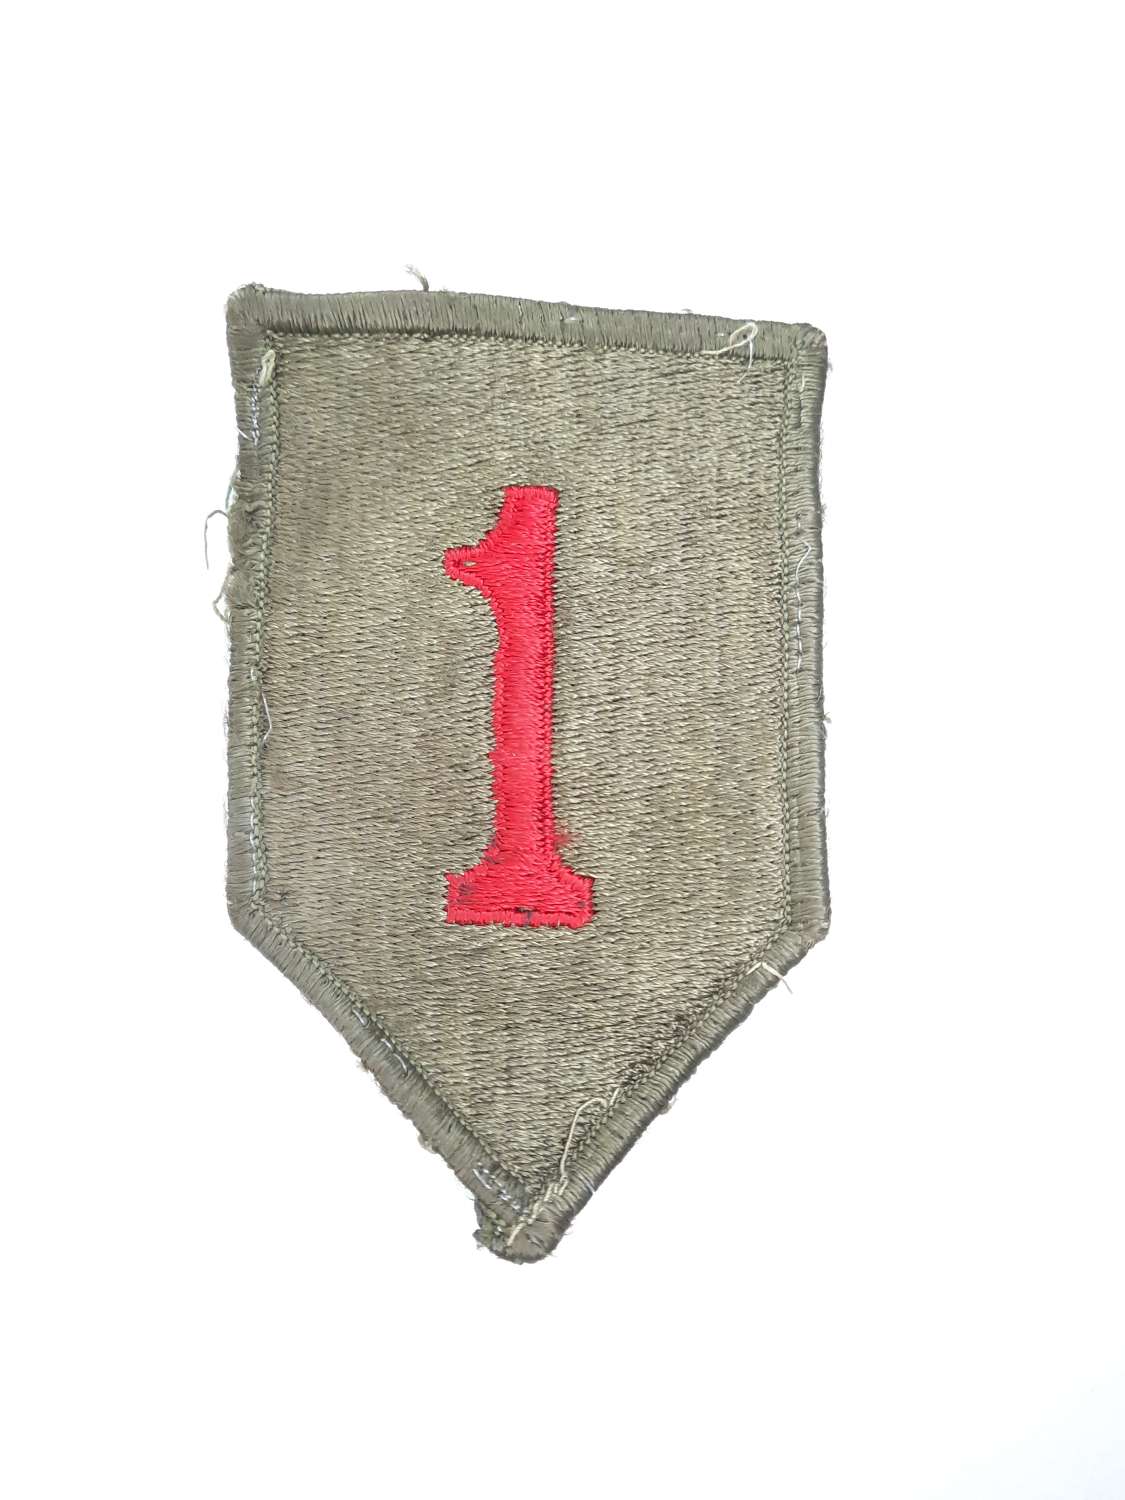 WW2 US Army 1st Infantry Division Patch